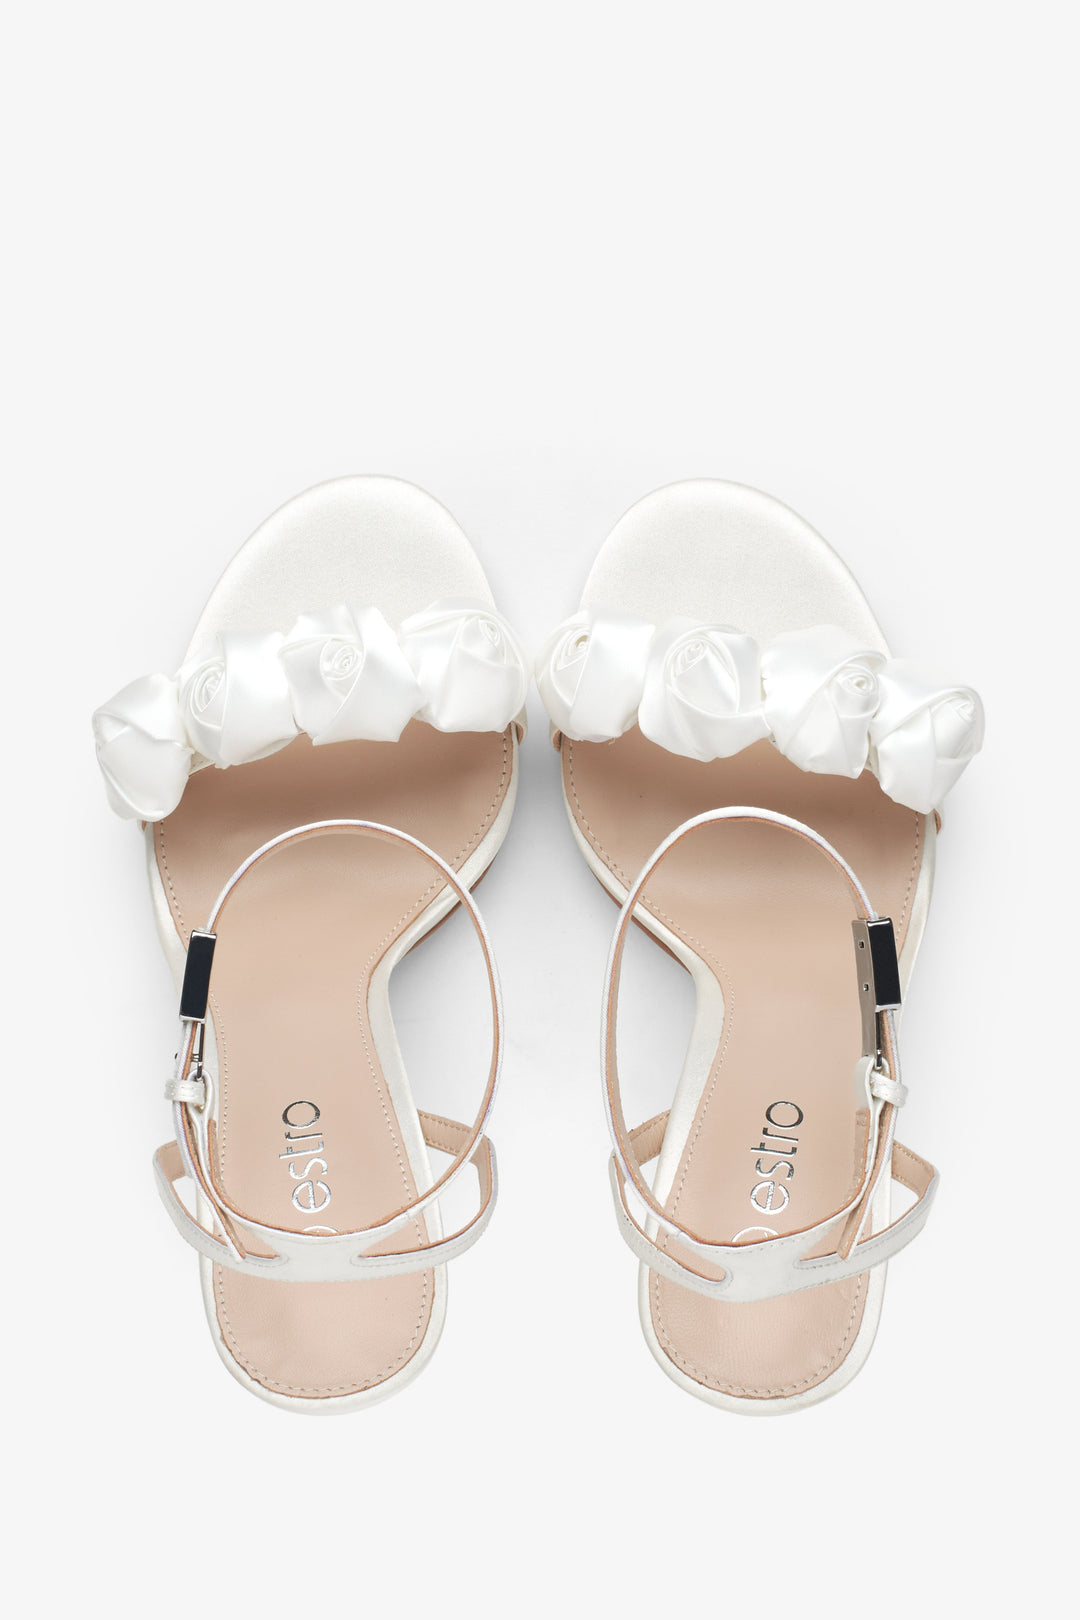 Women's white sandals with floral ornamented heels - top view presentation.